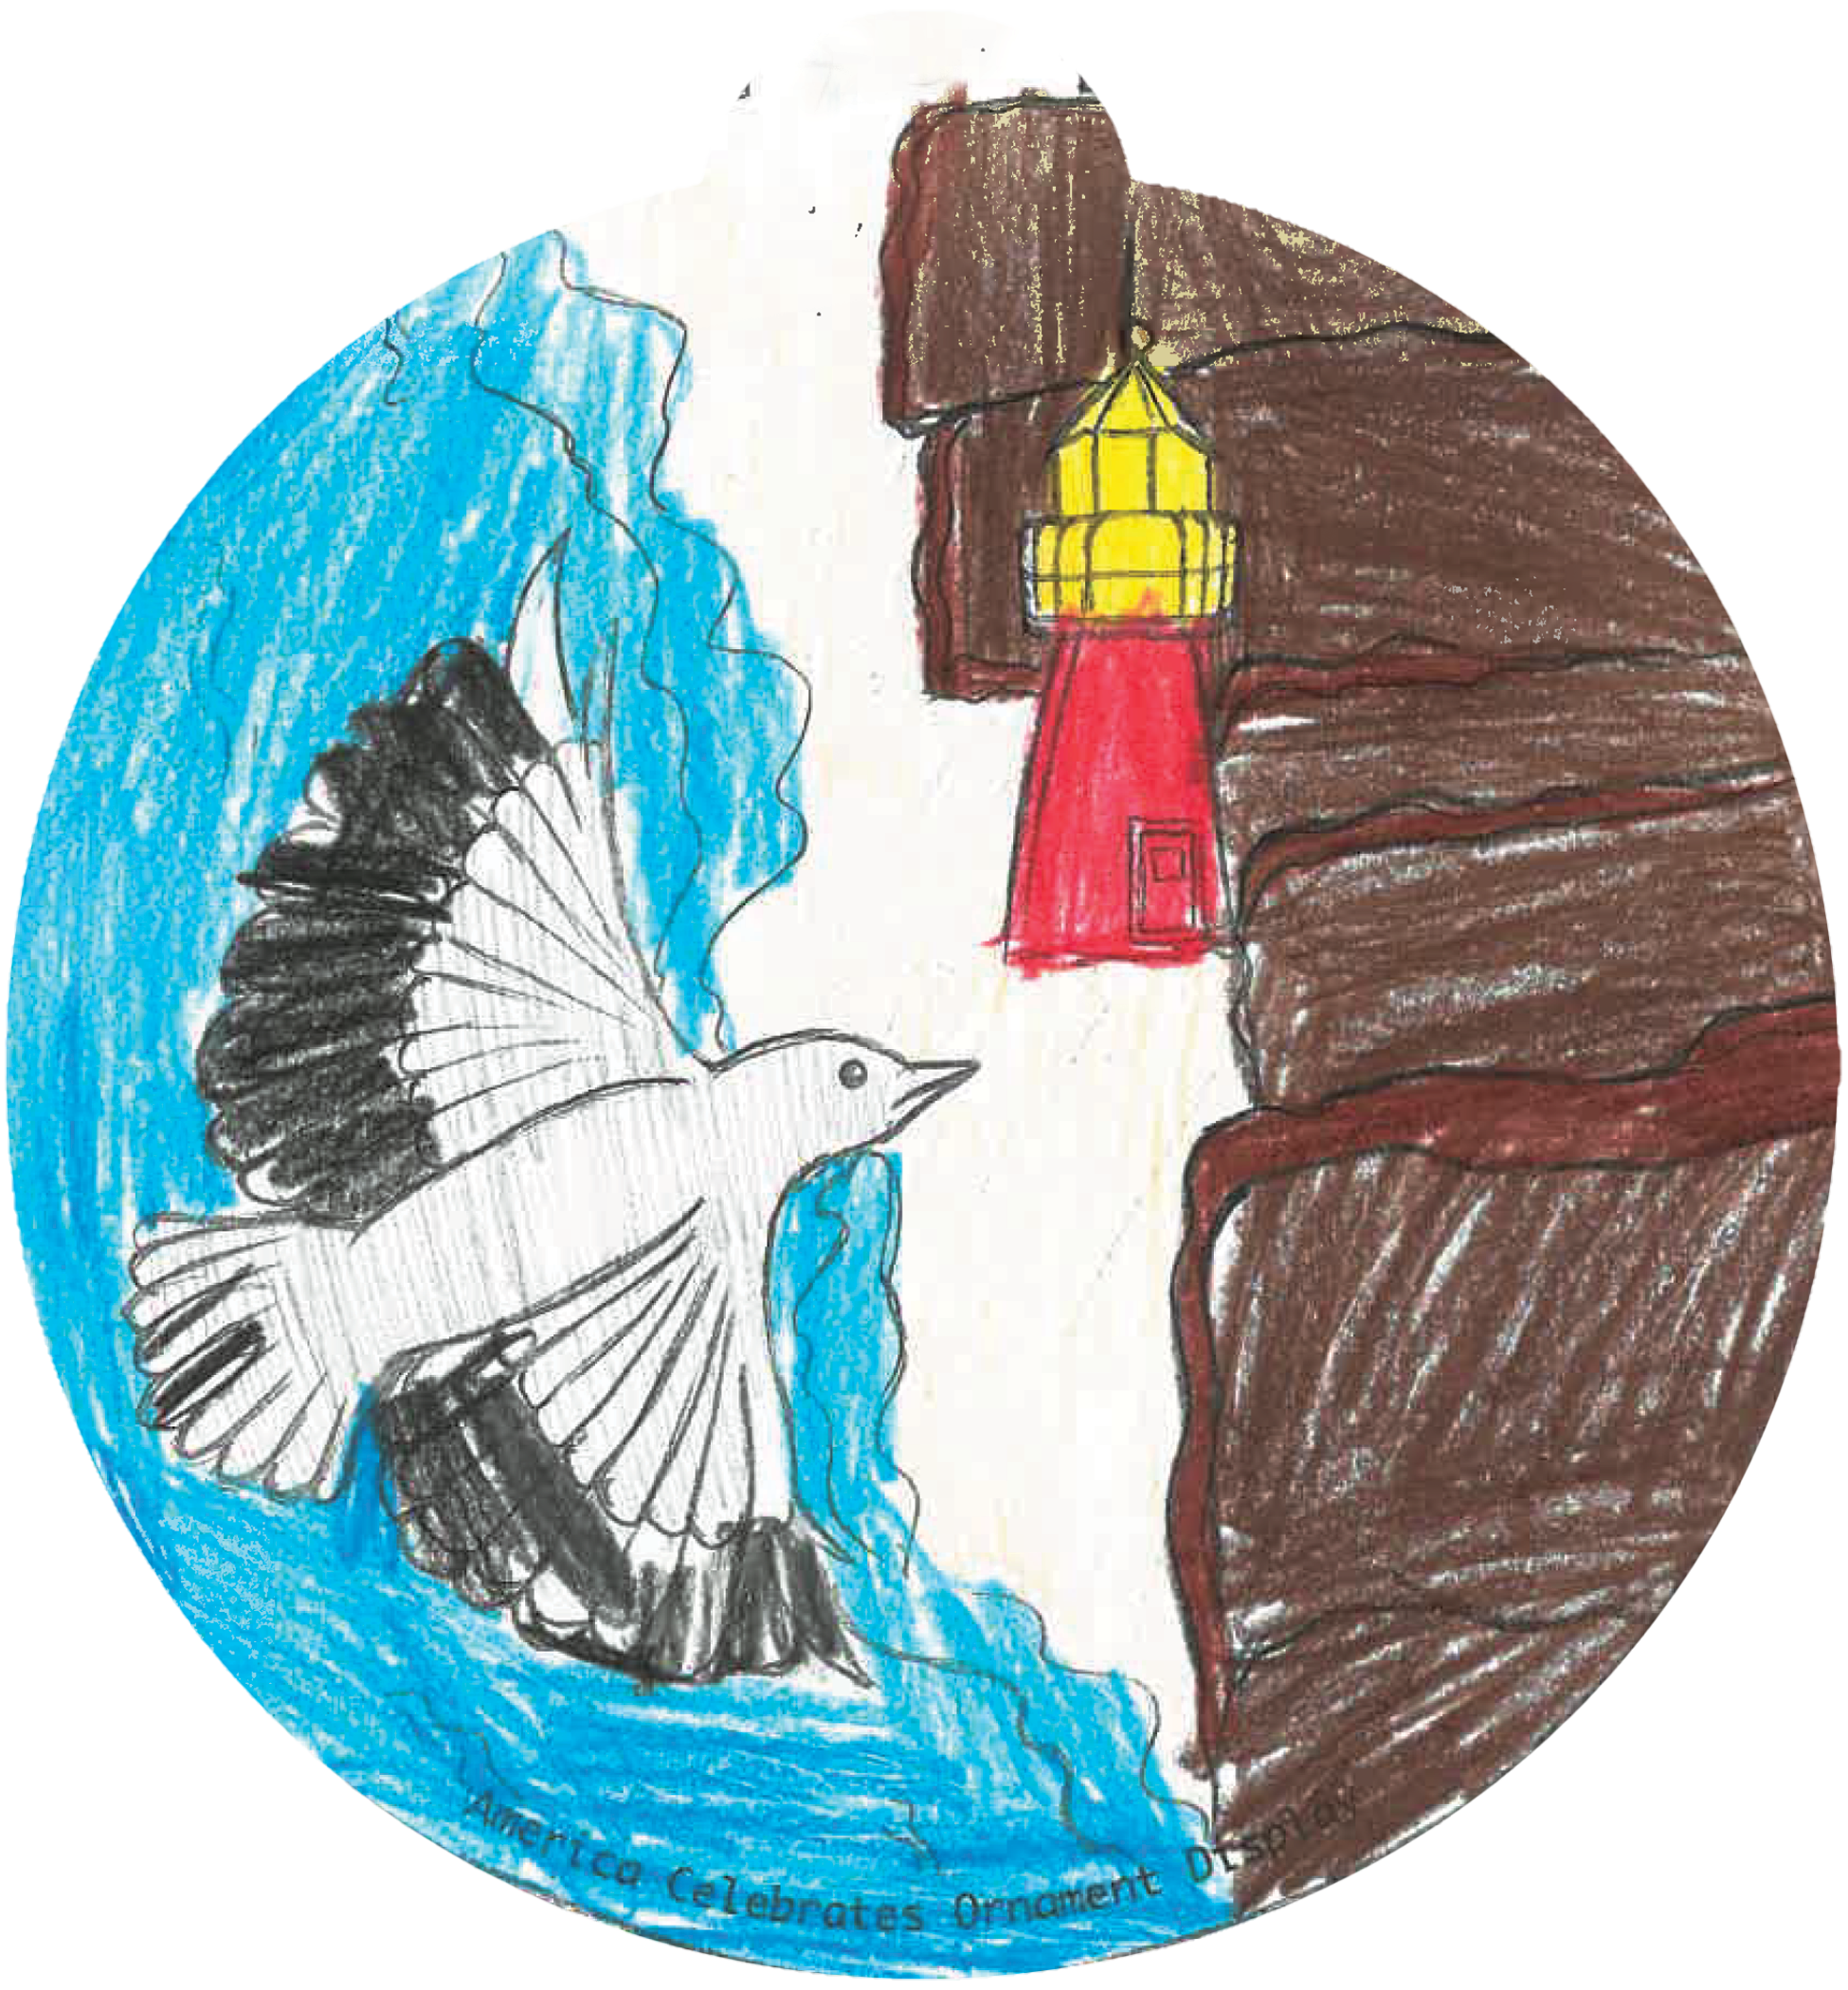 ornament depicting a seagull flying over the ocean to a shoreline, featuring a lighthouse